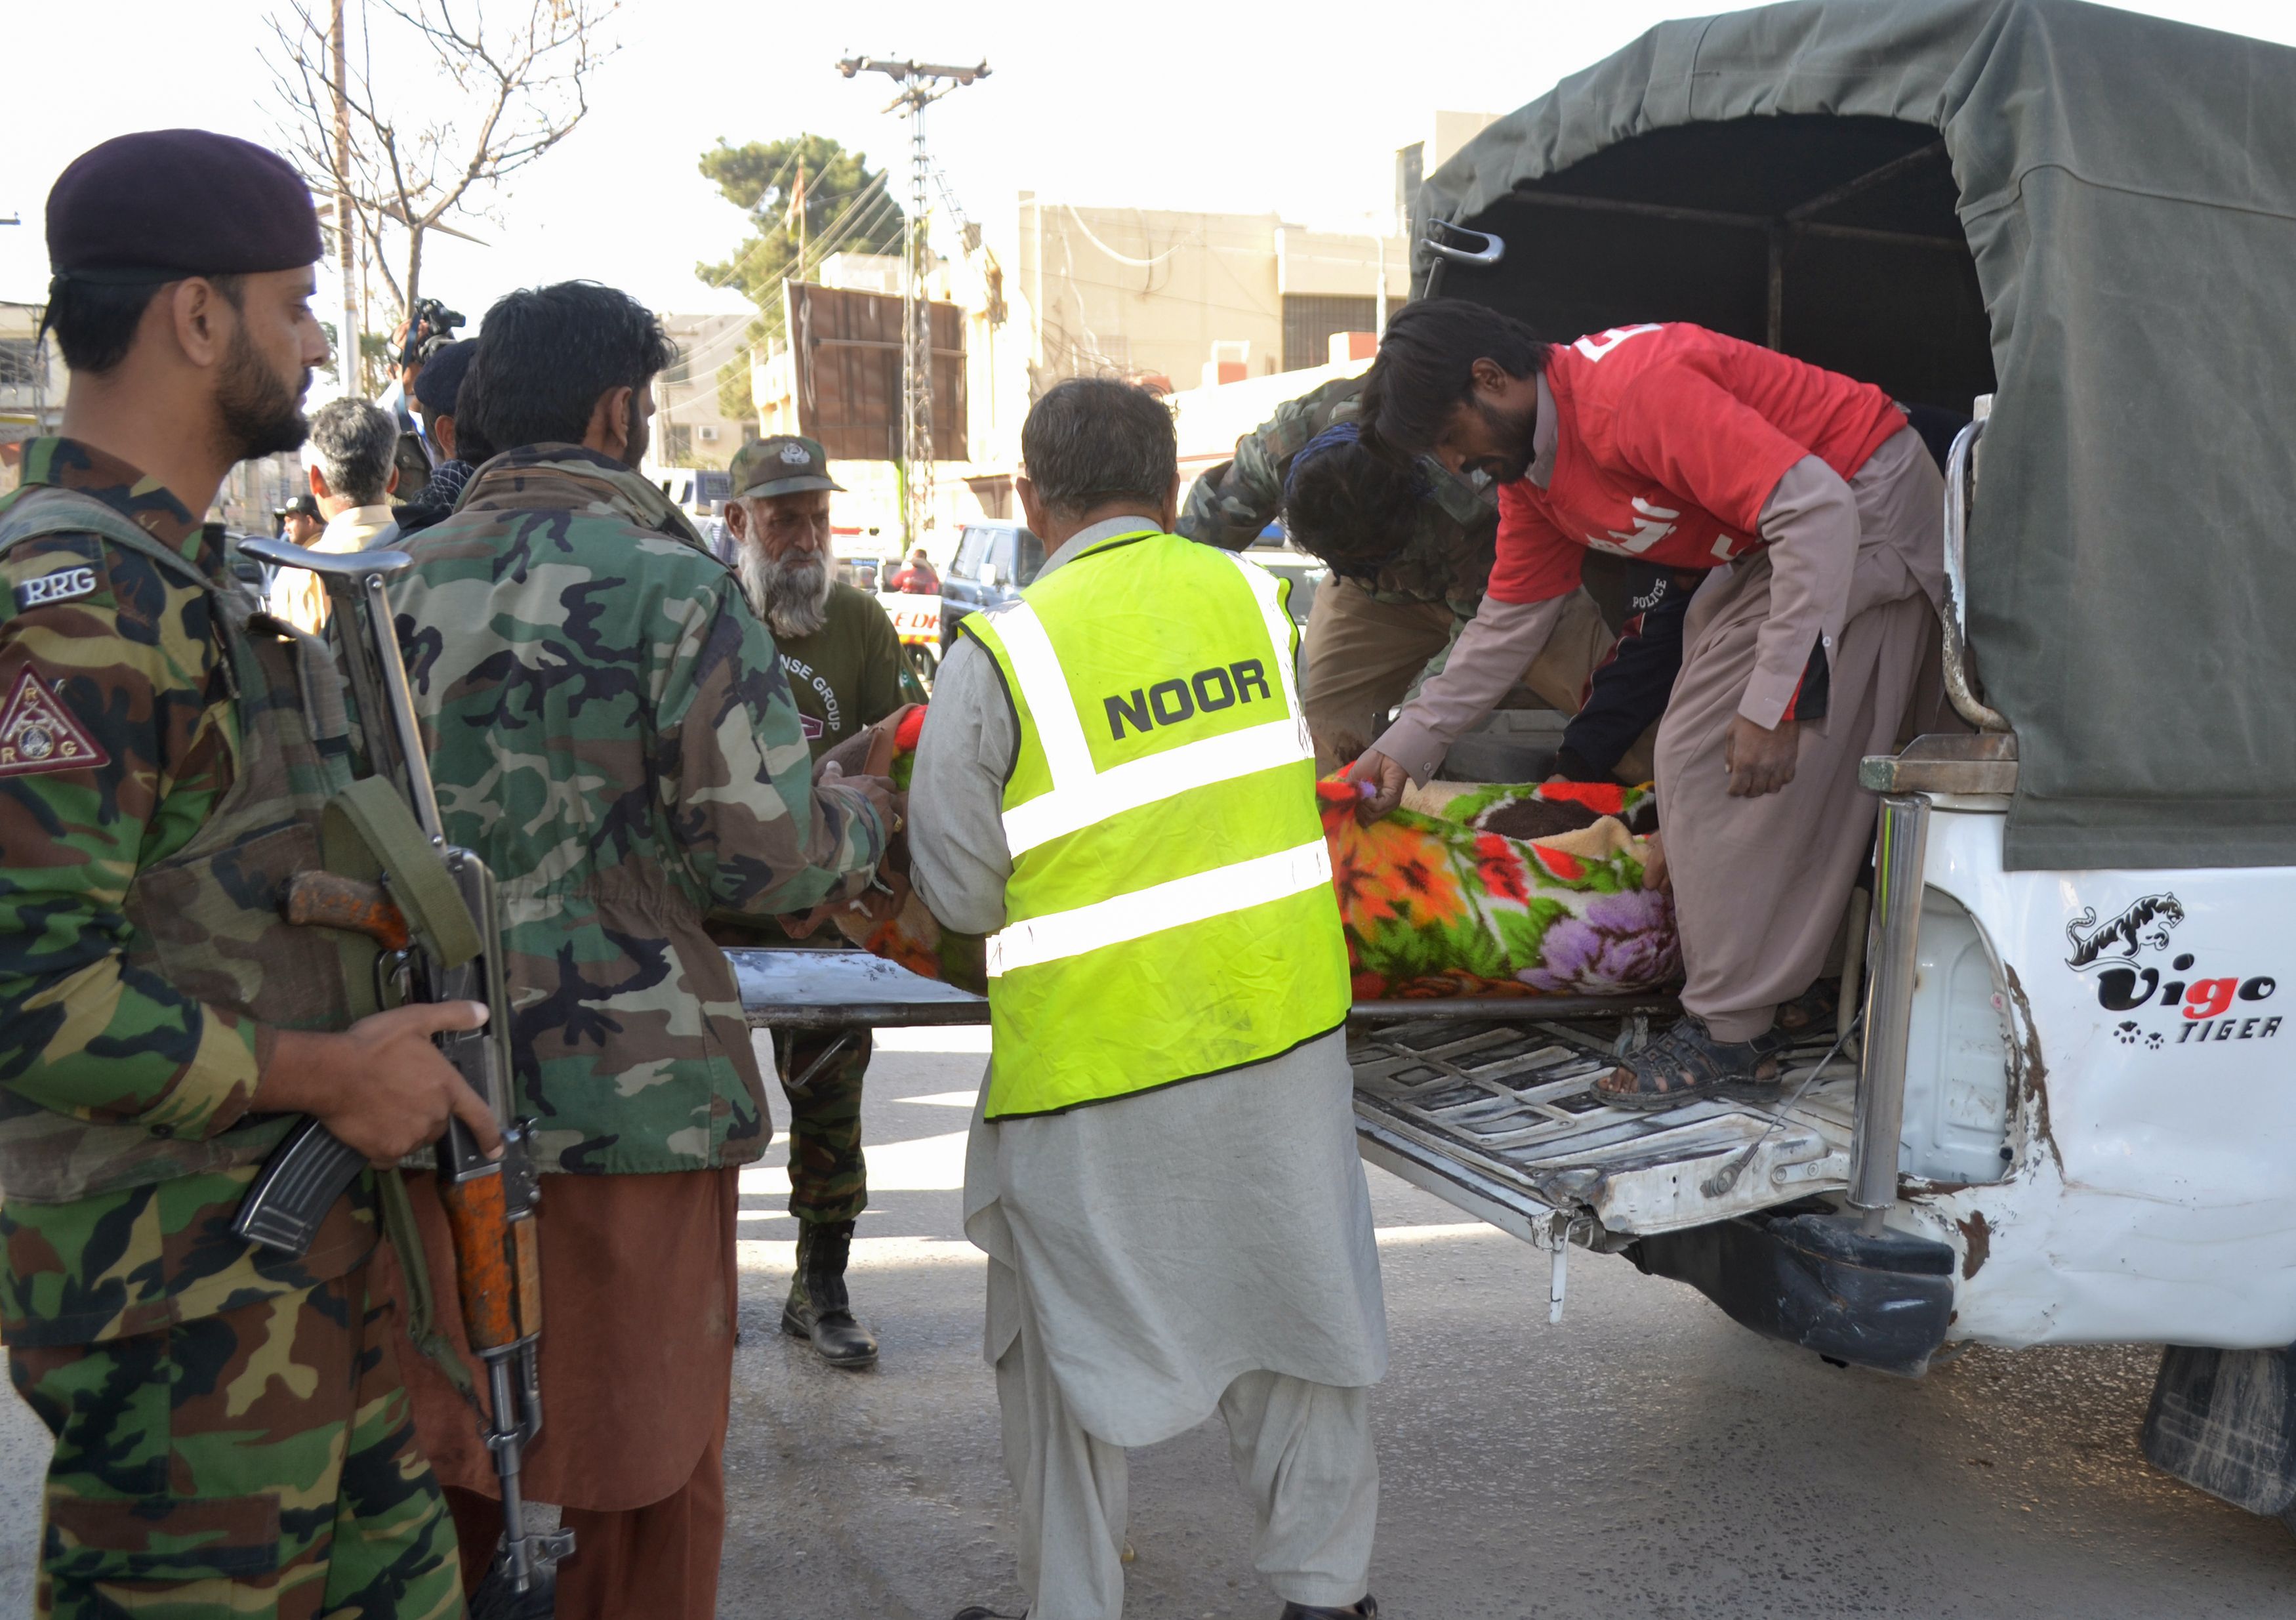 Security personnel transport an injured man in Quetta on October 25, 2016, after militants attacked a police academy.